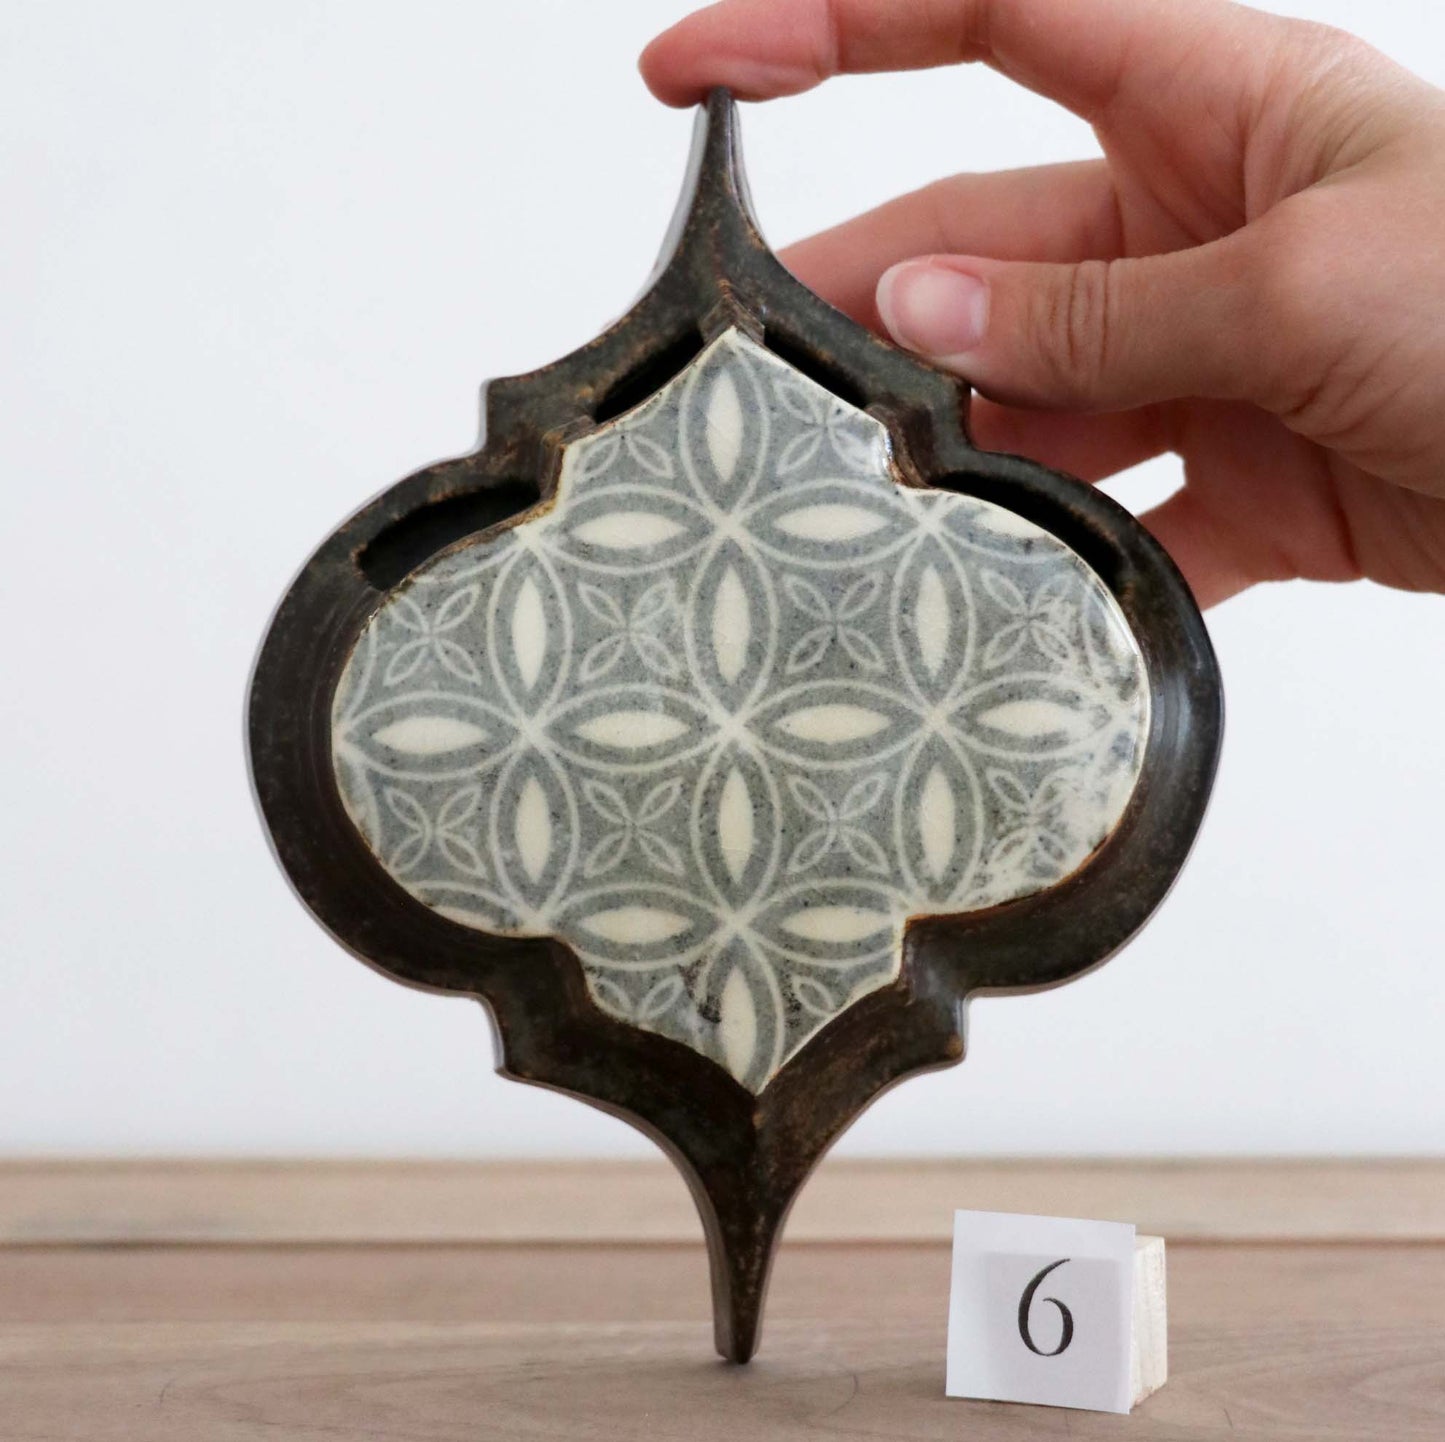 Quatrefoil Wall Vase with Transfers: 6